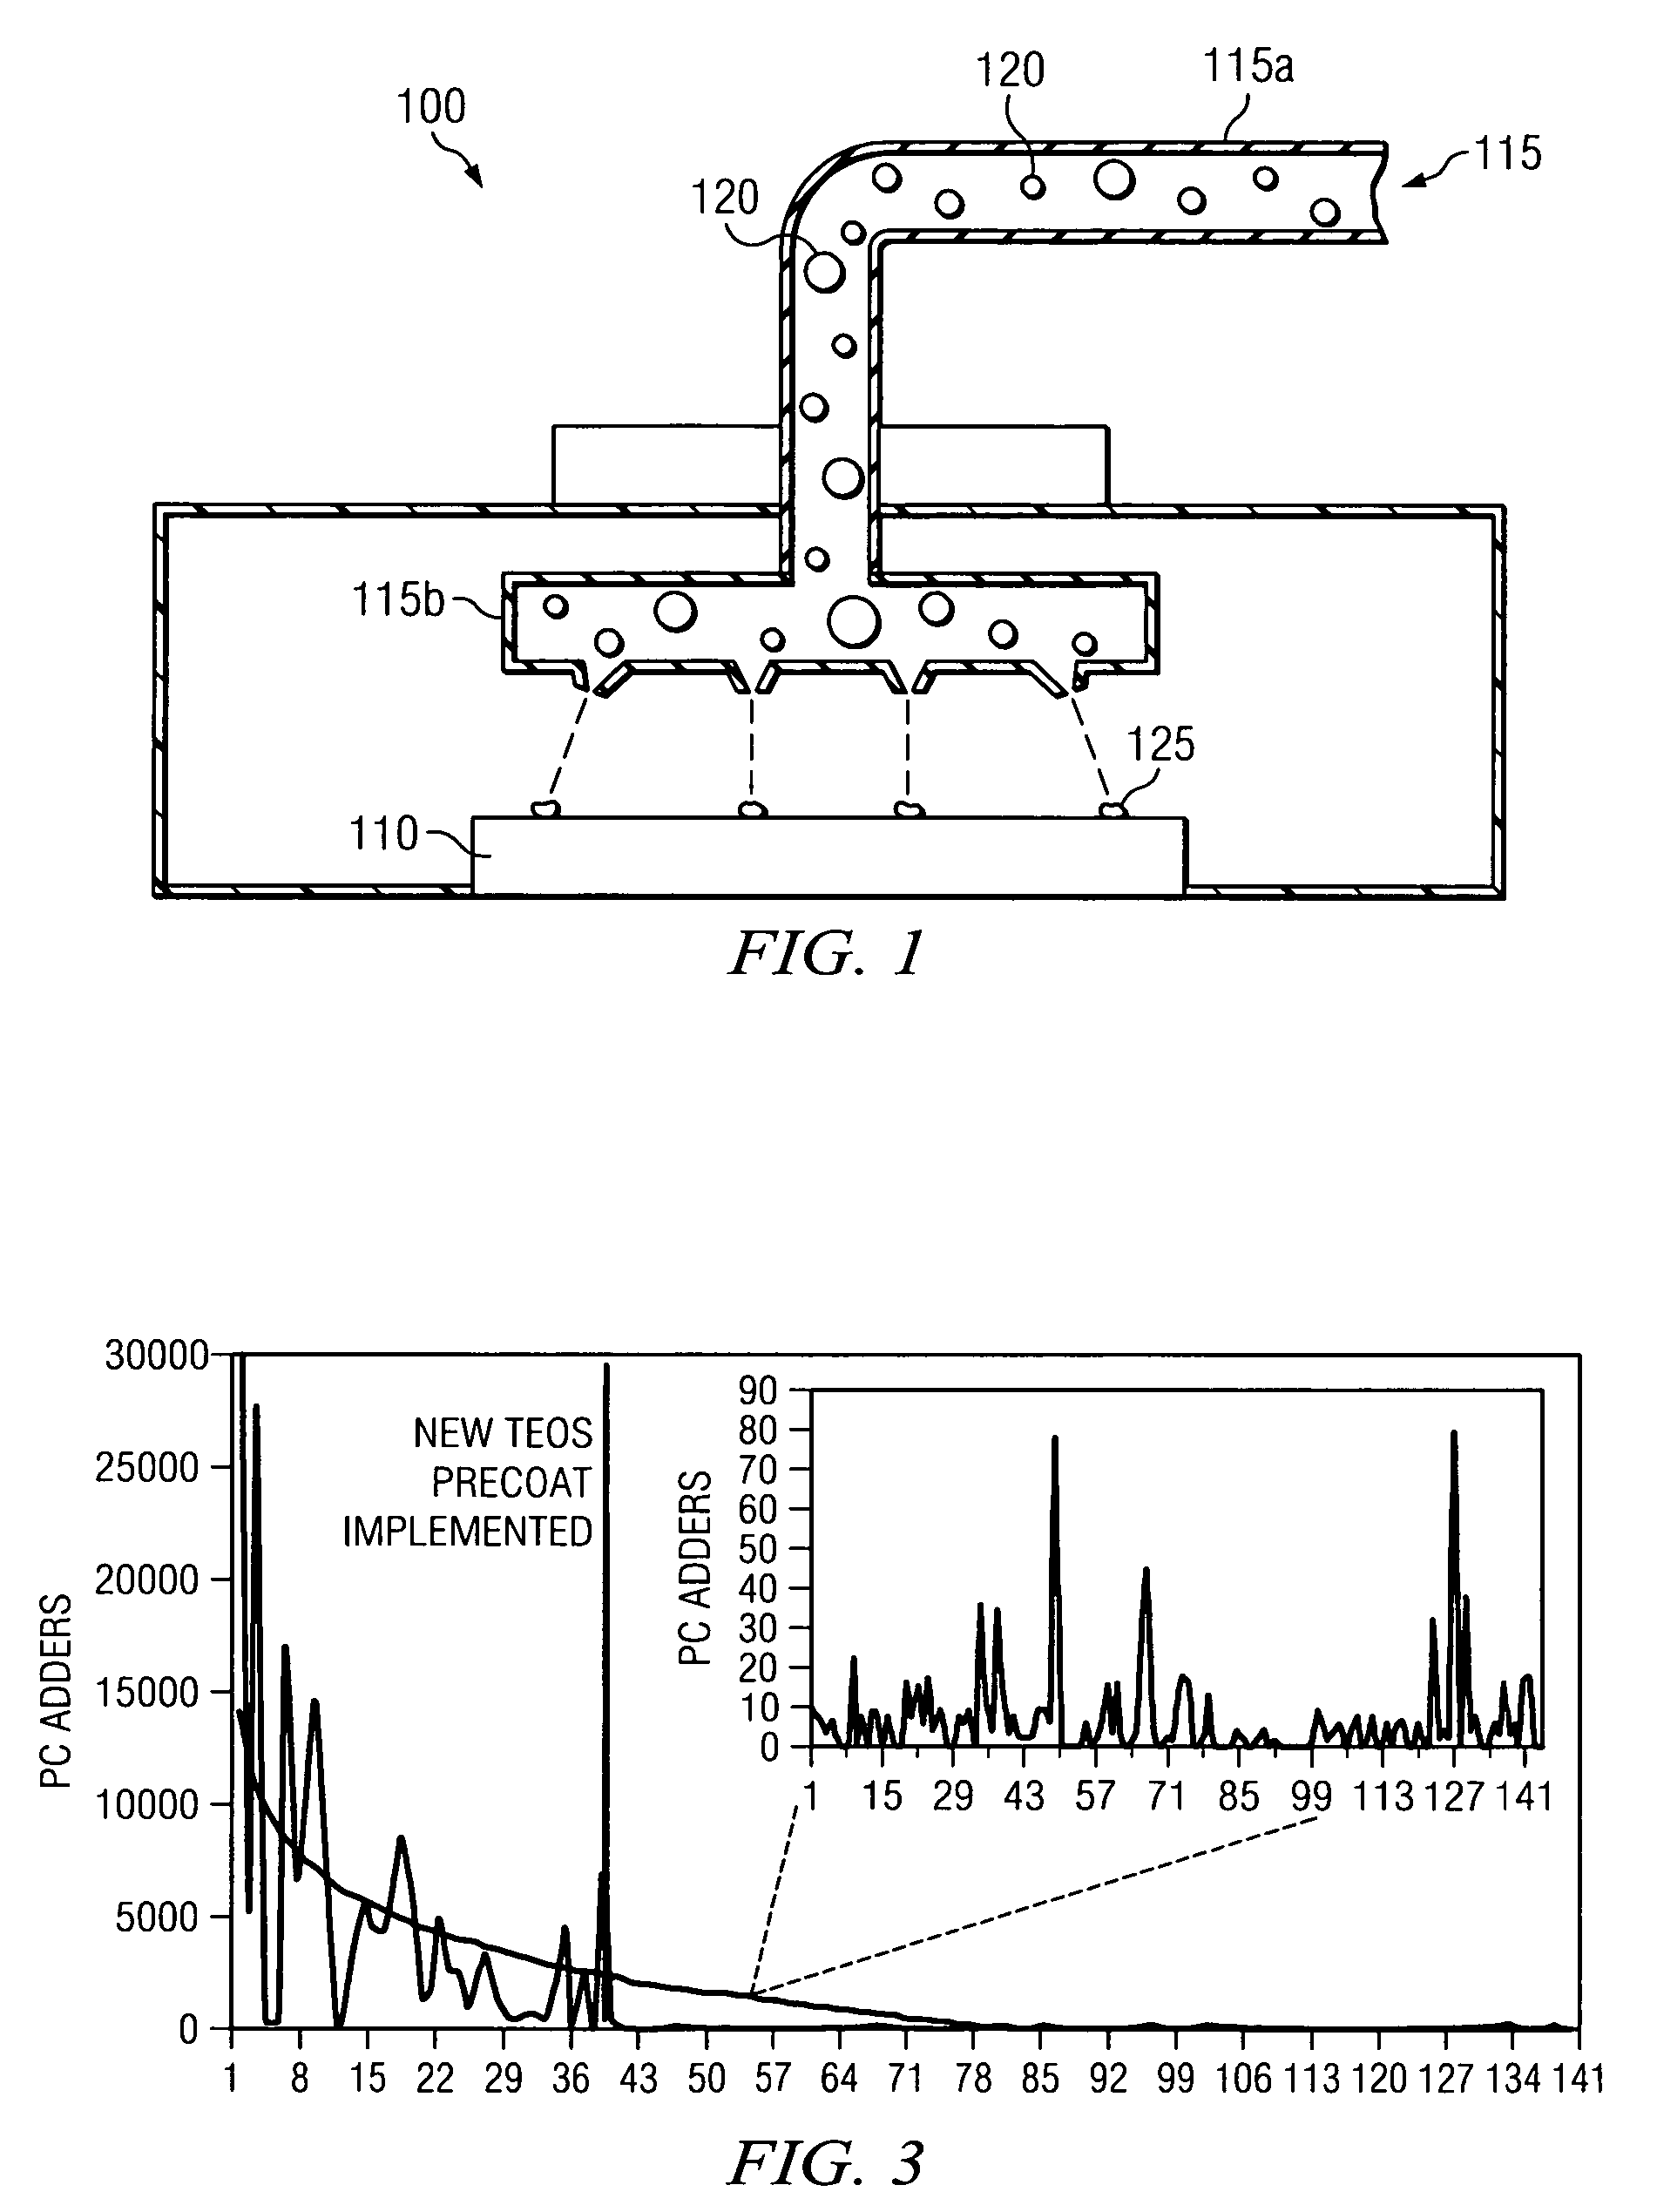 Method for conditioning a microelectronics device deposition chamber